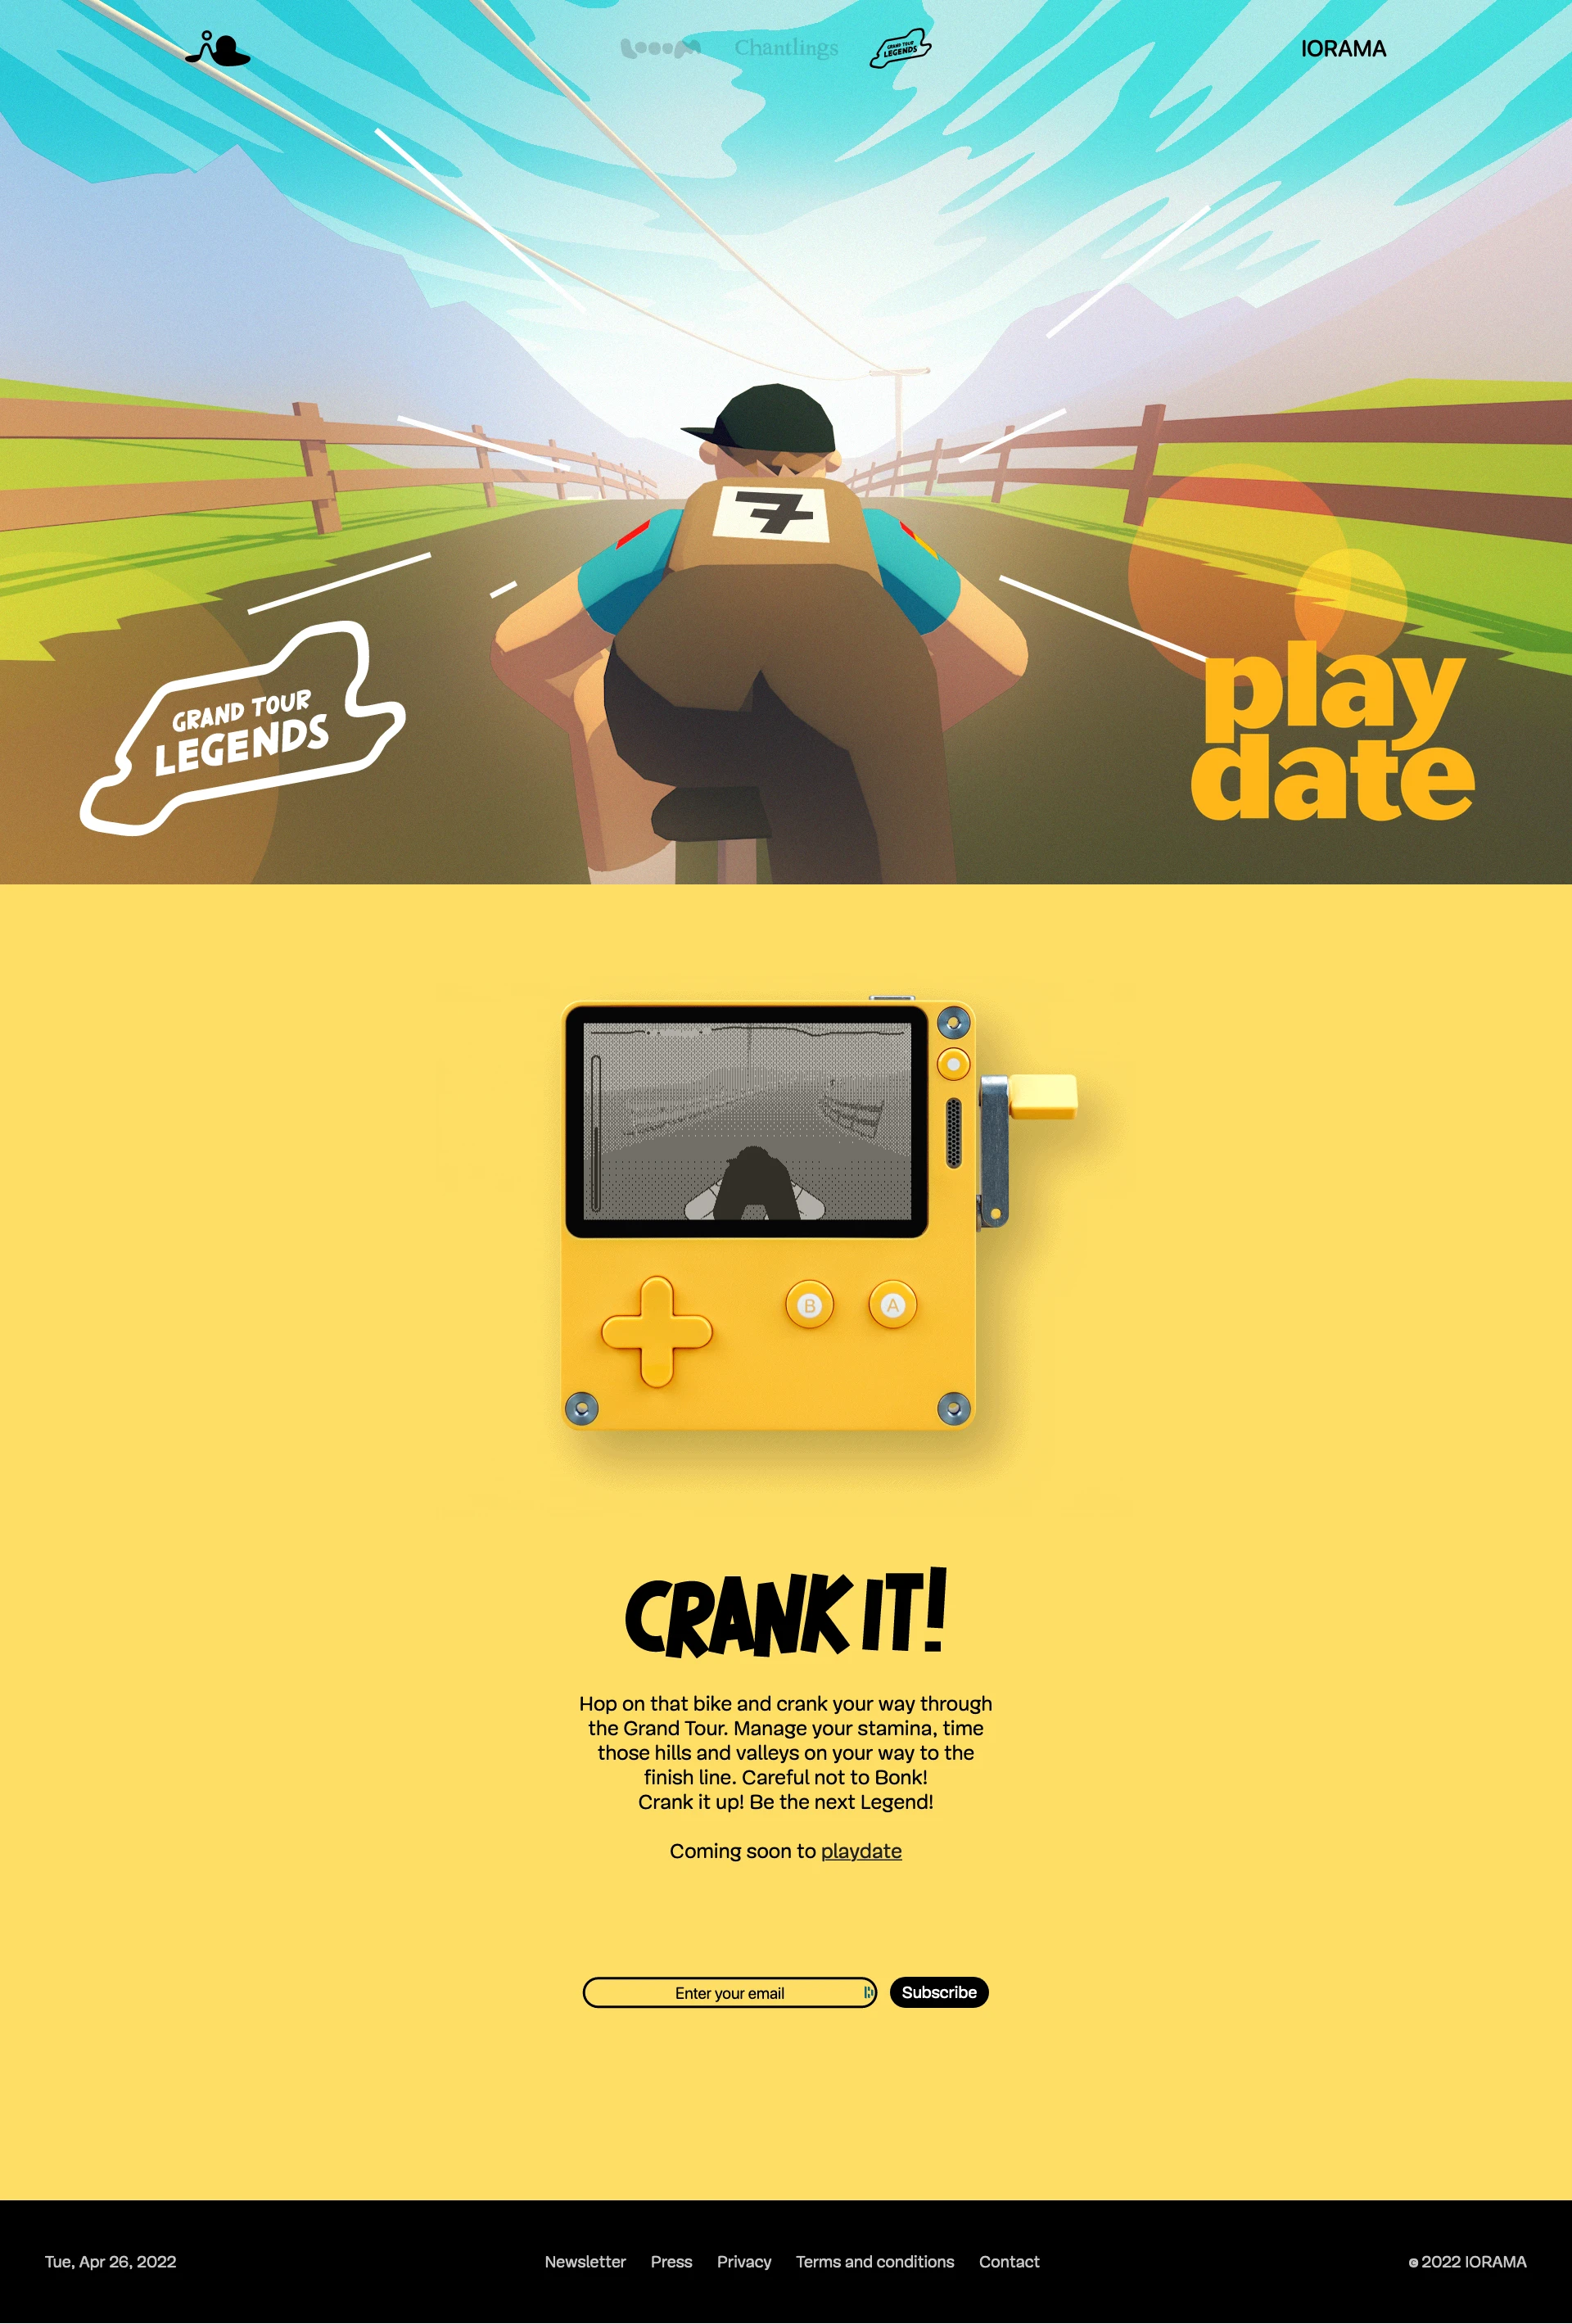 Chantlings by Iorama Landing Page Example: Inspired by musical instruments and early video games we set out to create meaningful and playful experiences for all ages with a hearty focus on creativity.